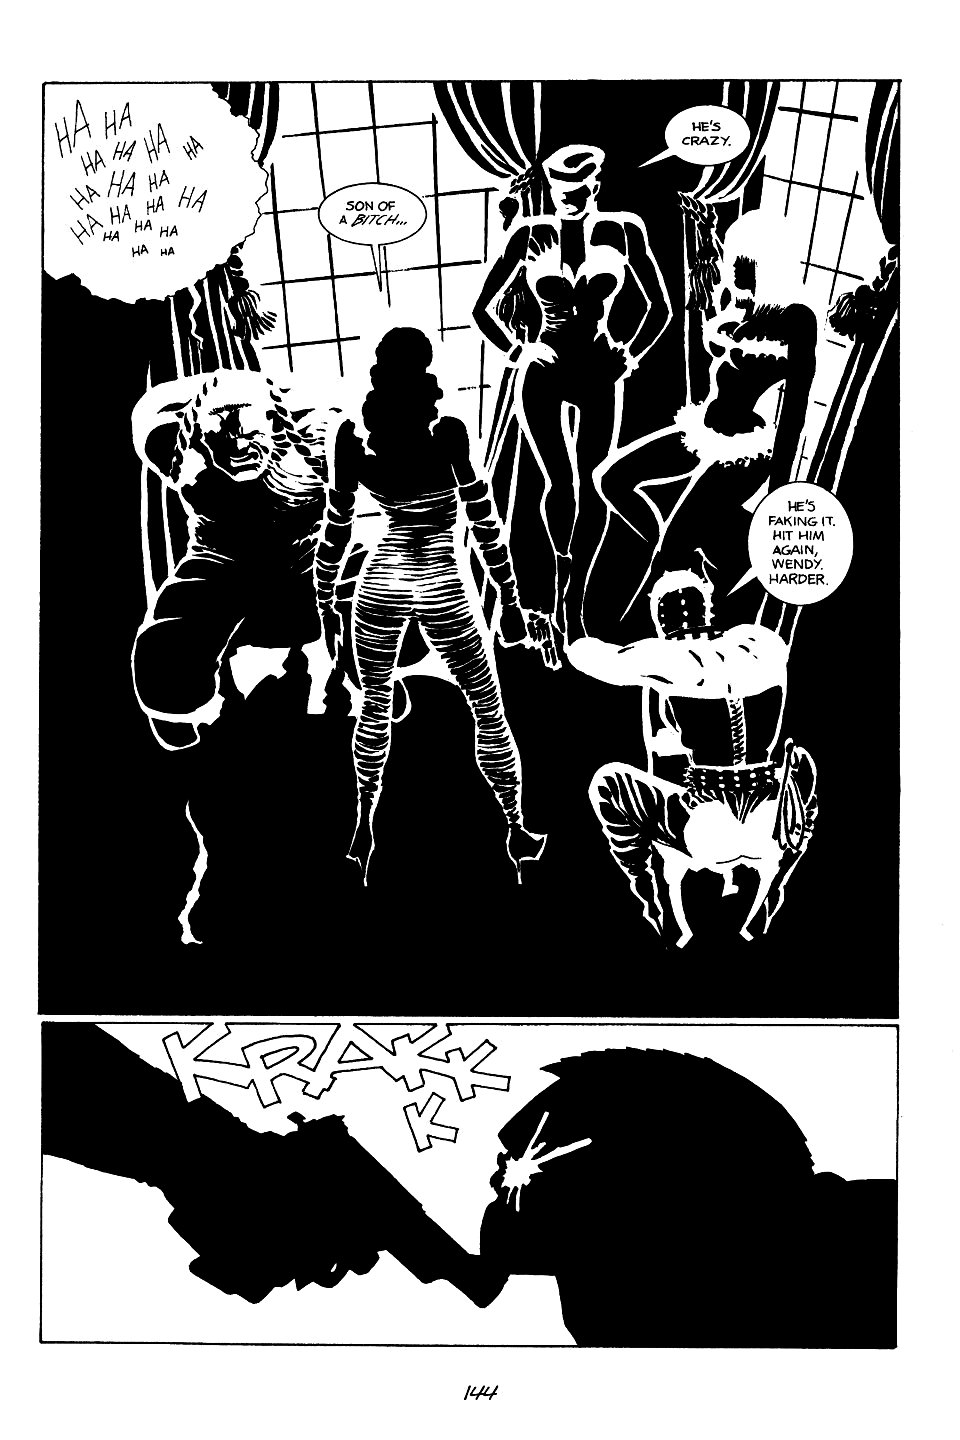 page 144 of sin city 1 the hard goodbye